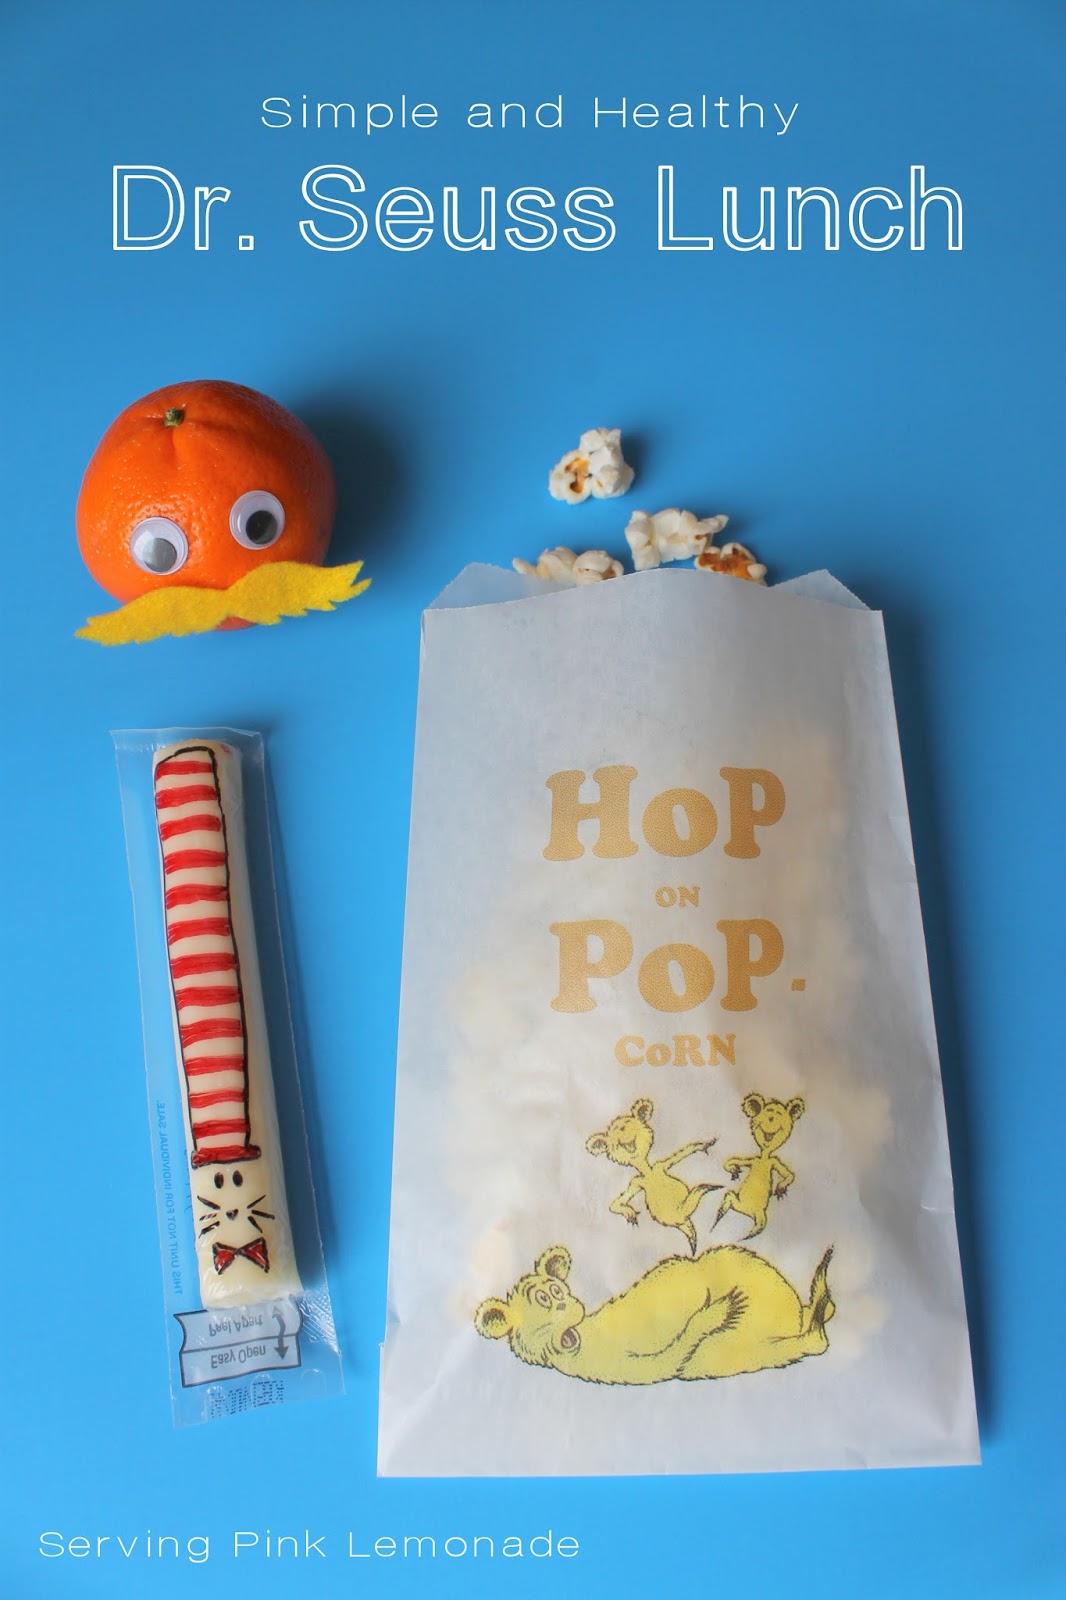 Simple and Healthy Dr. Seuss Lunch